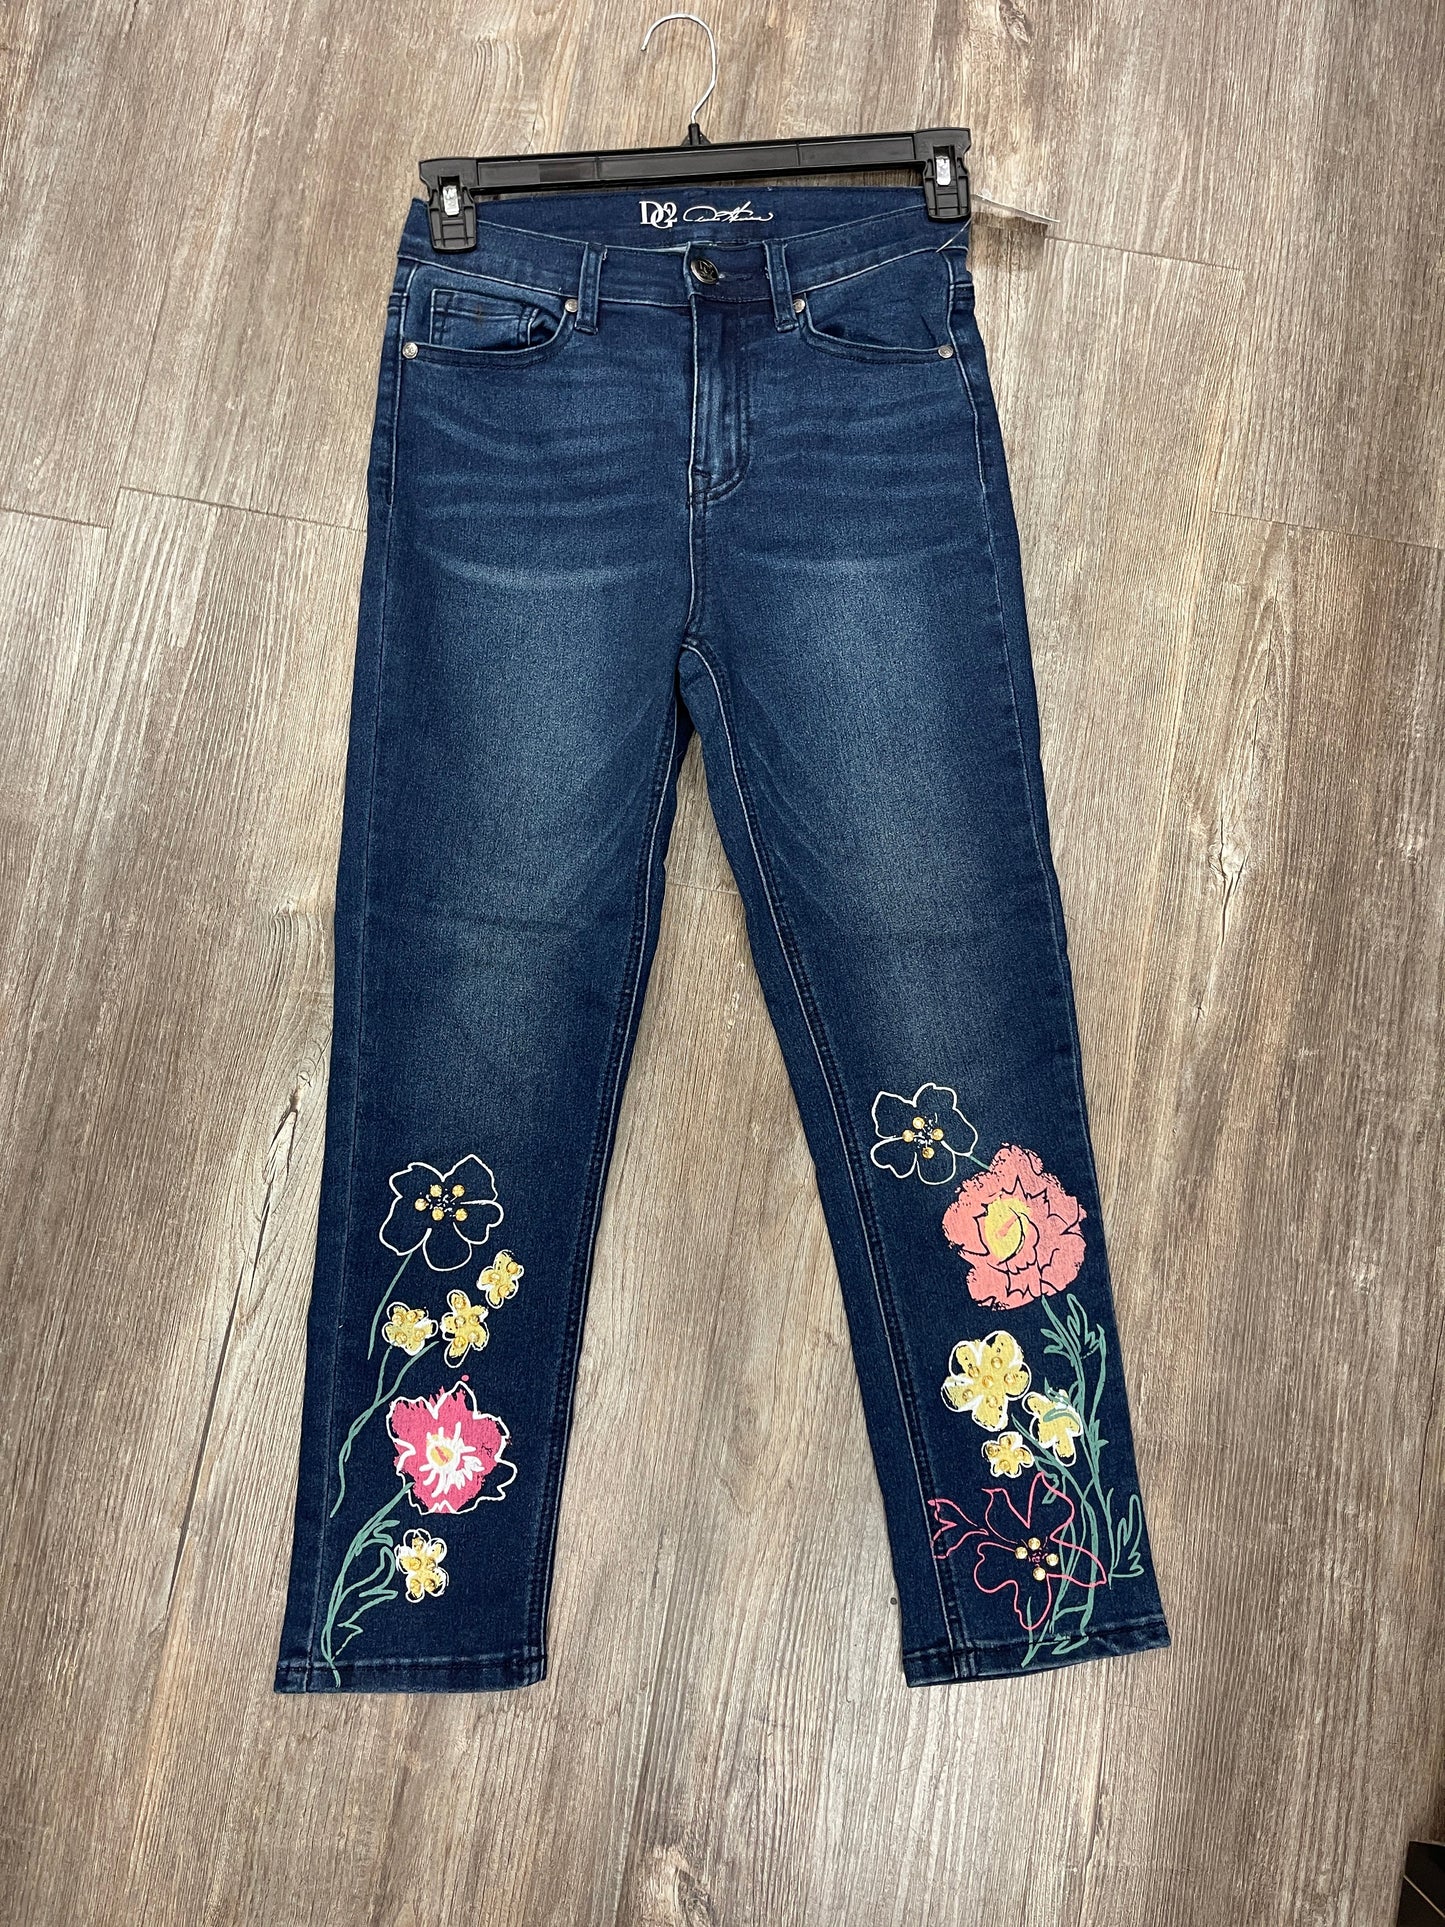 Jeans Cropped By Cmc  Size: 2